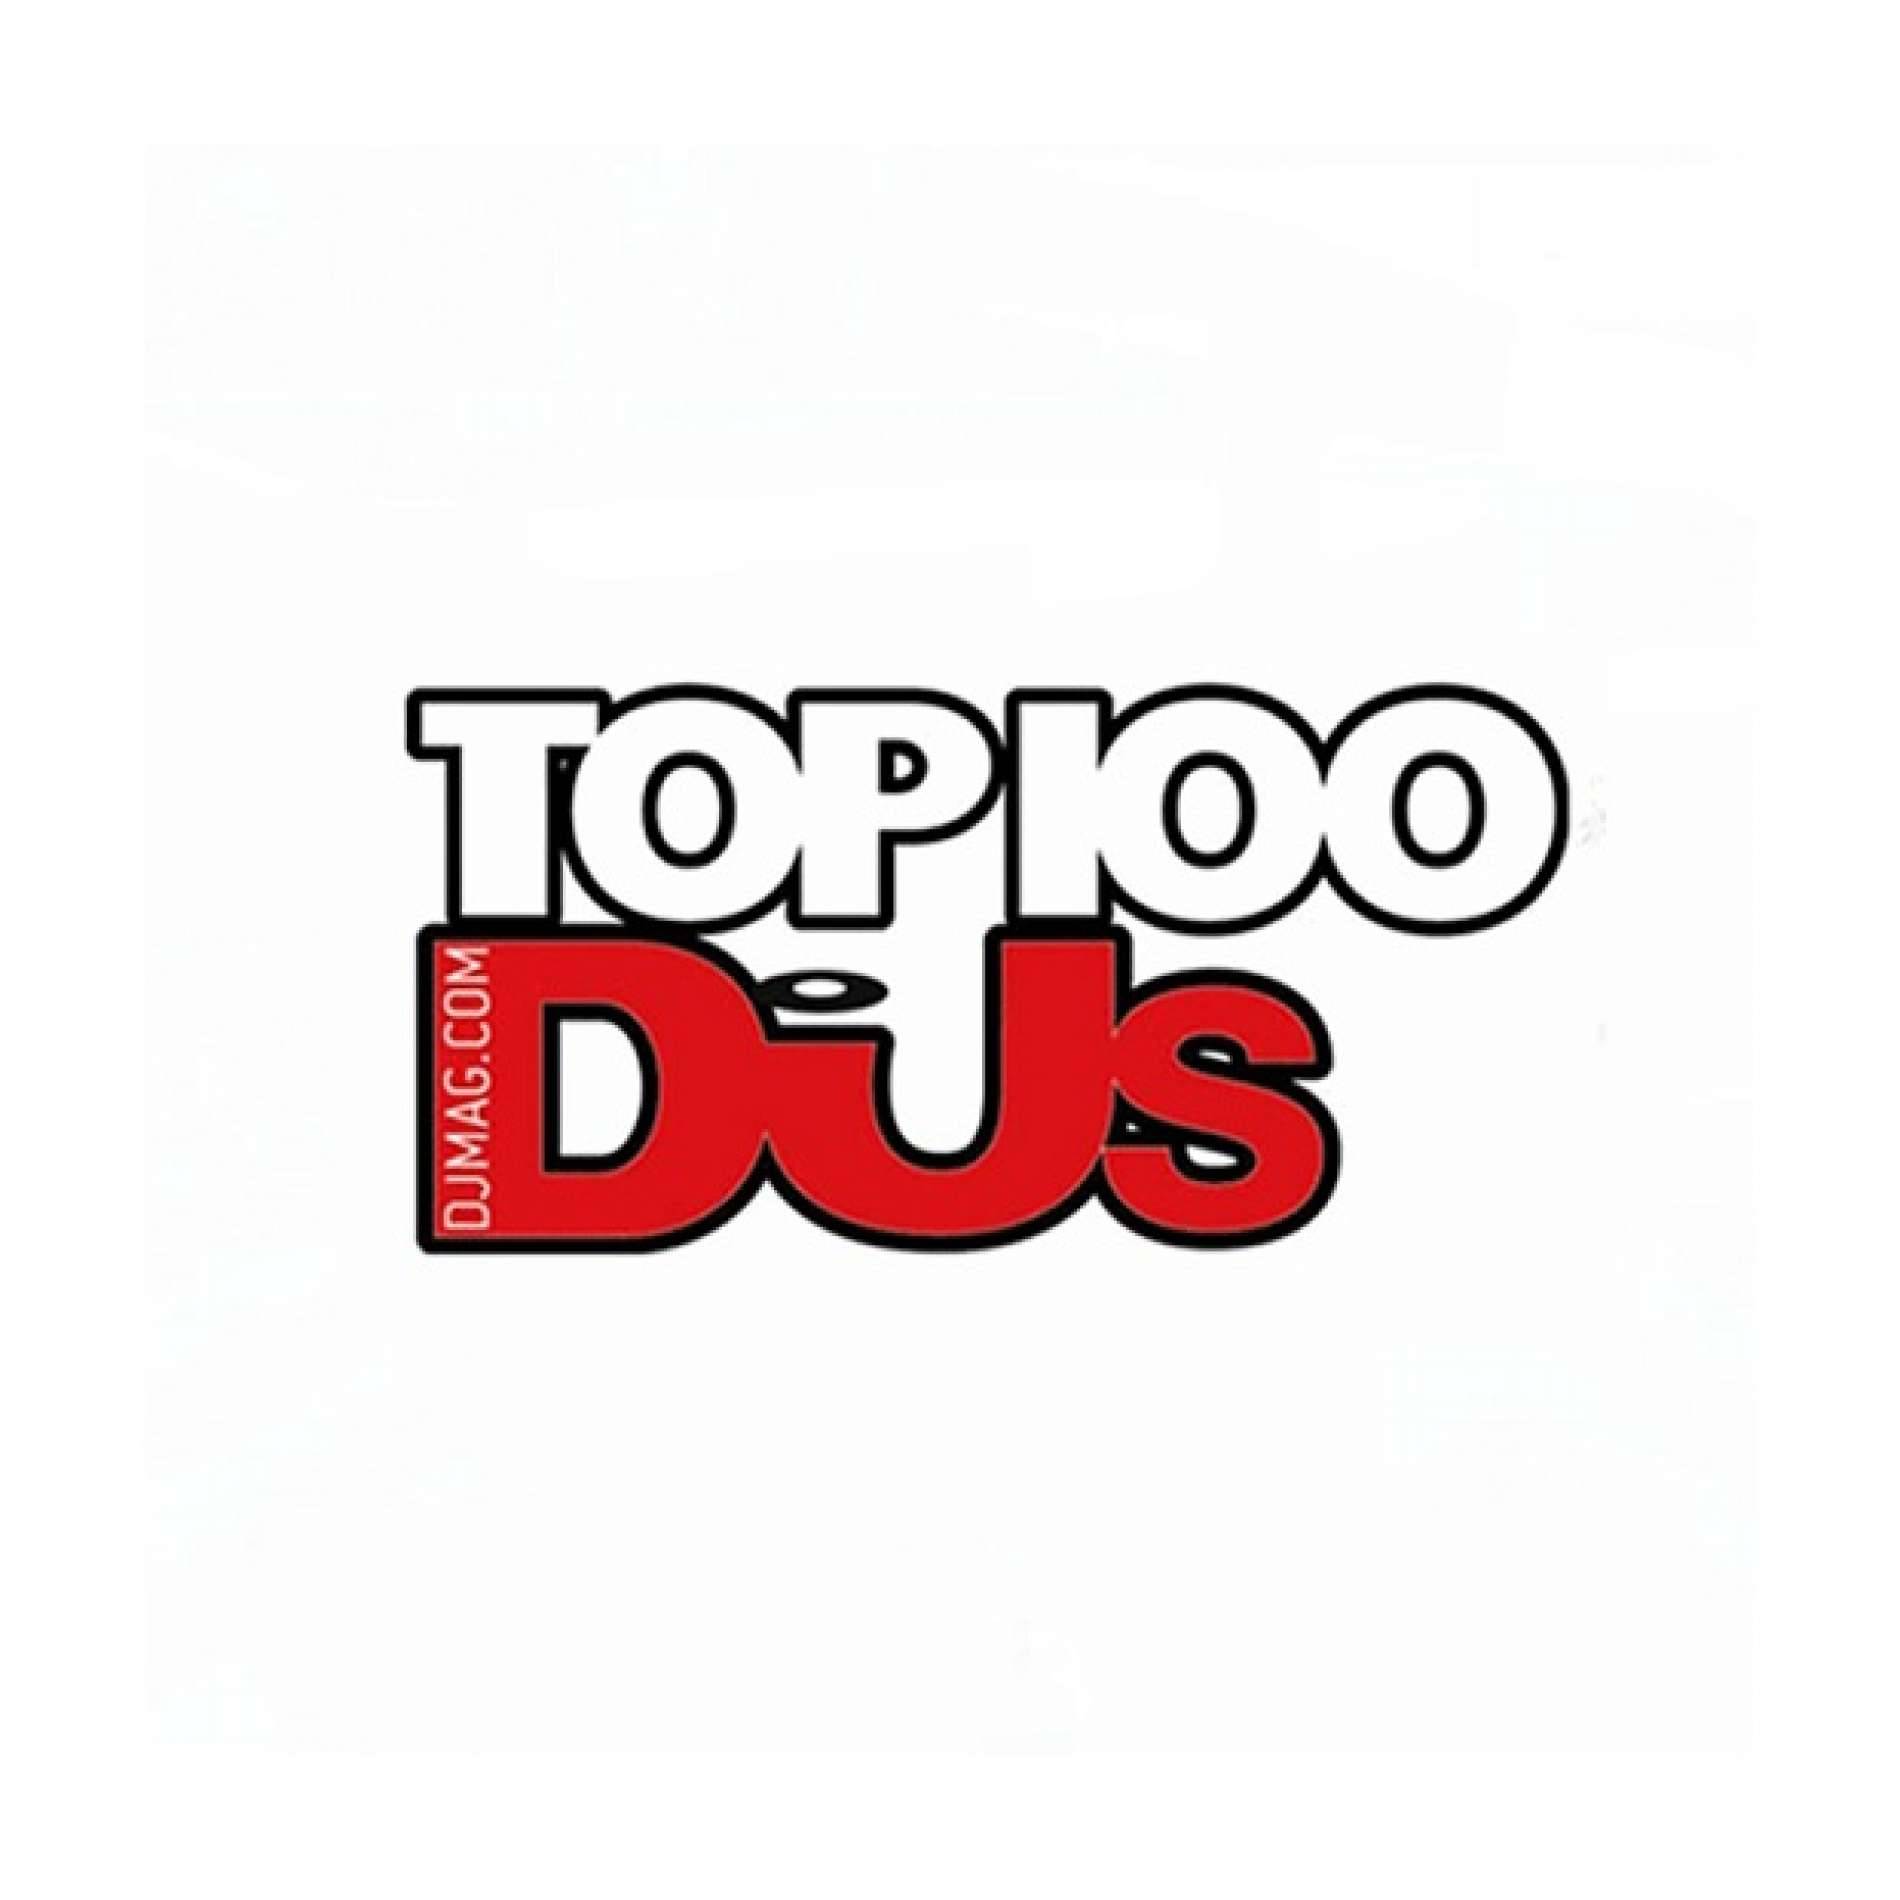 Spinnin' Records congratulates its artists in the DJ Top 100